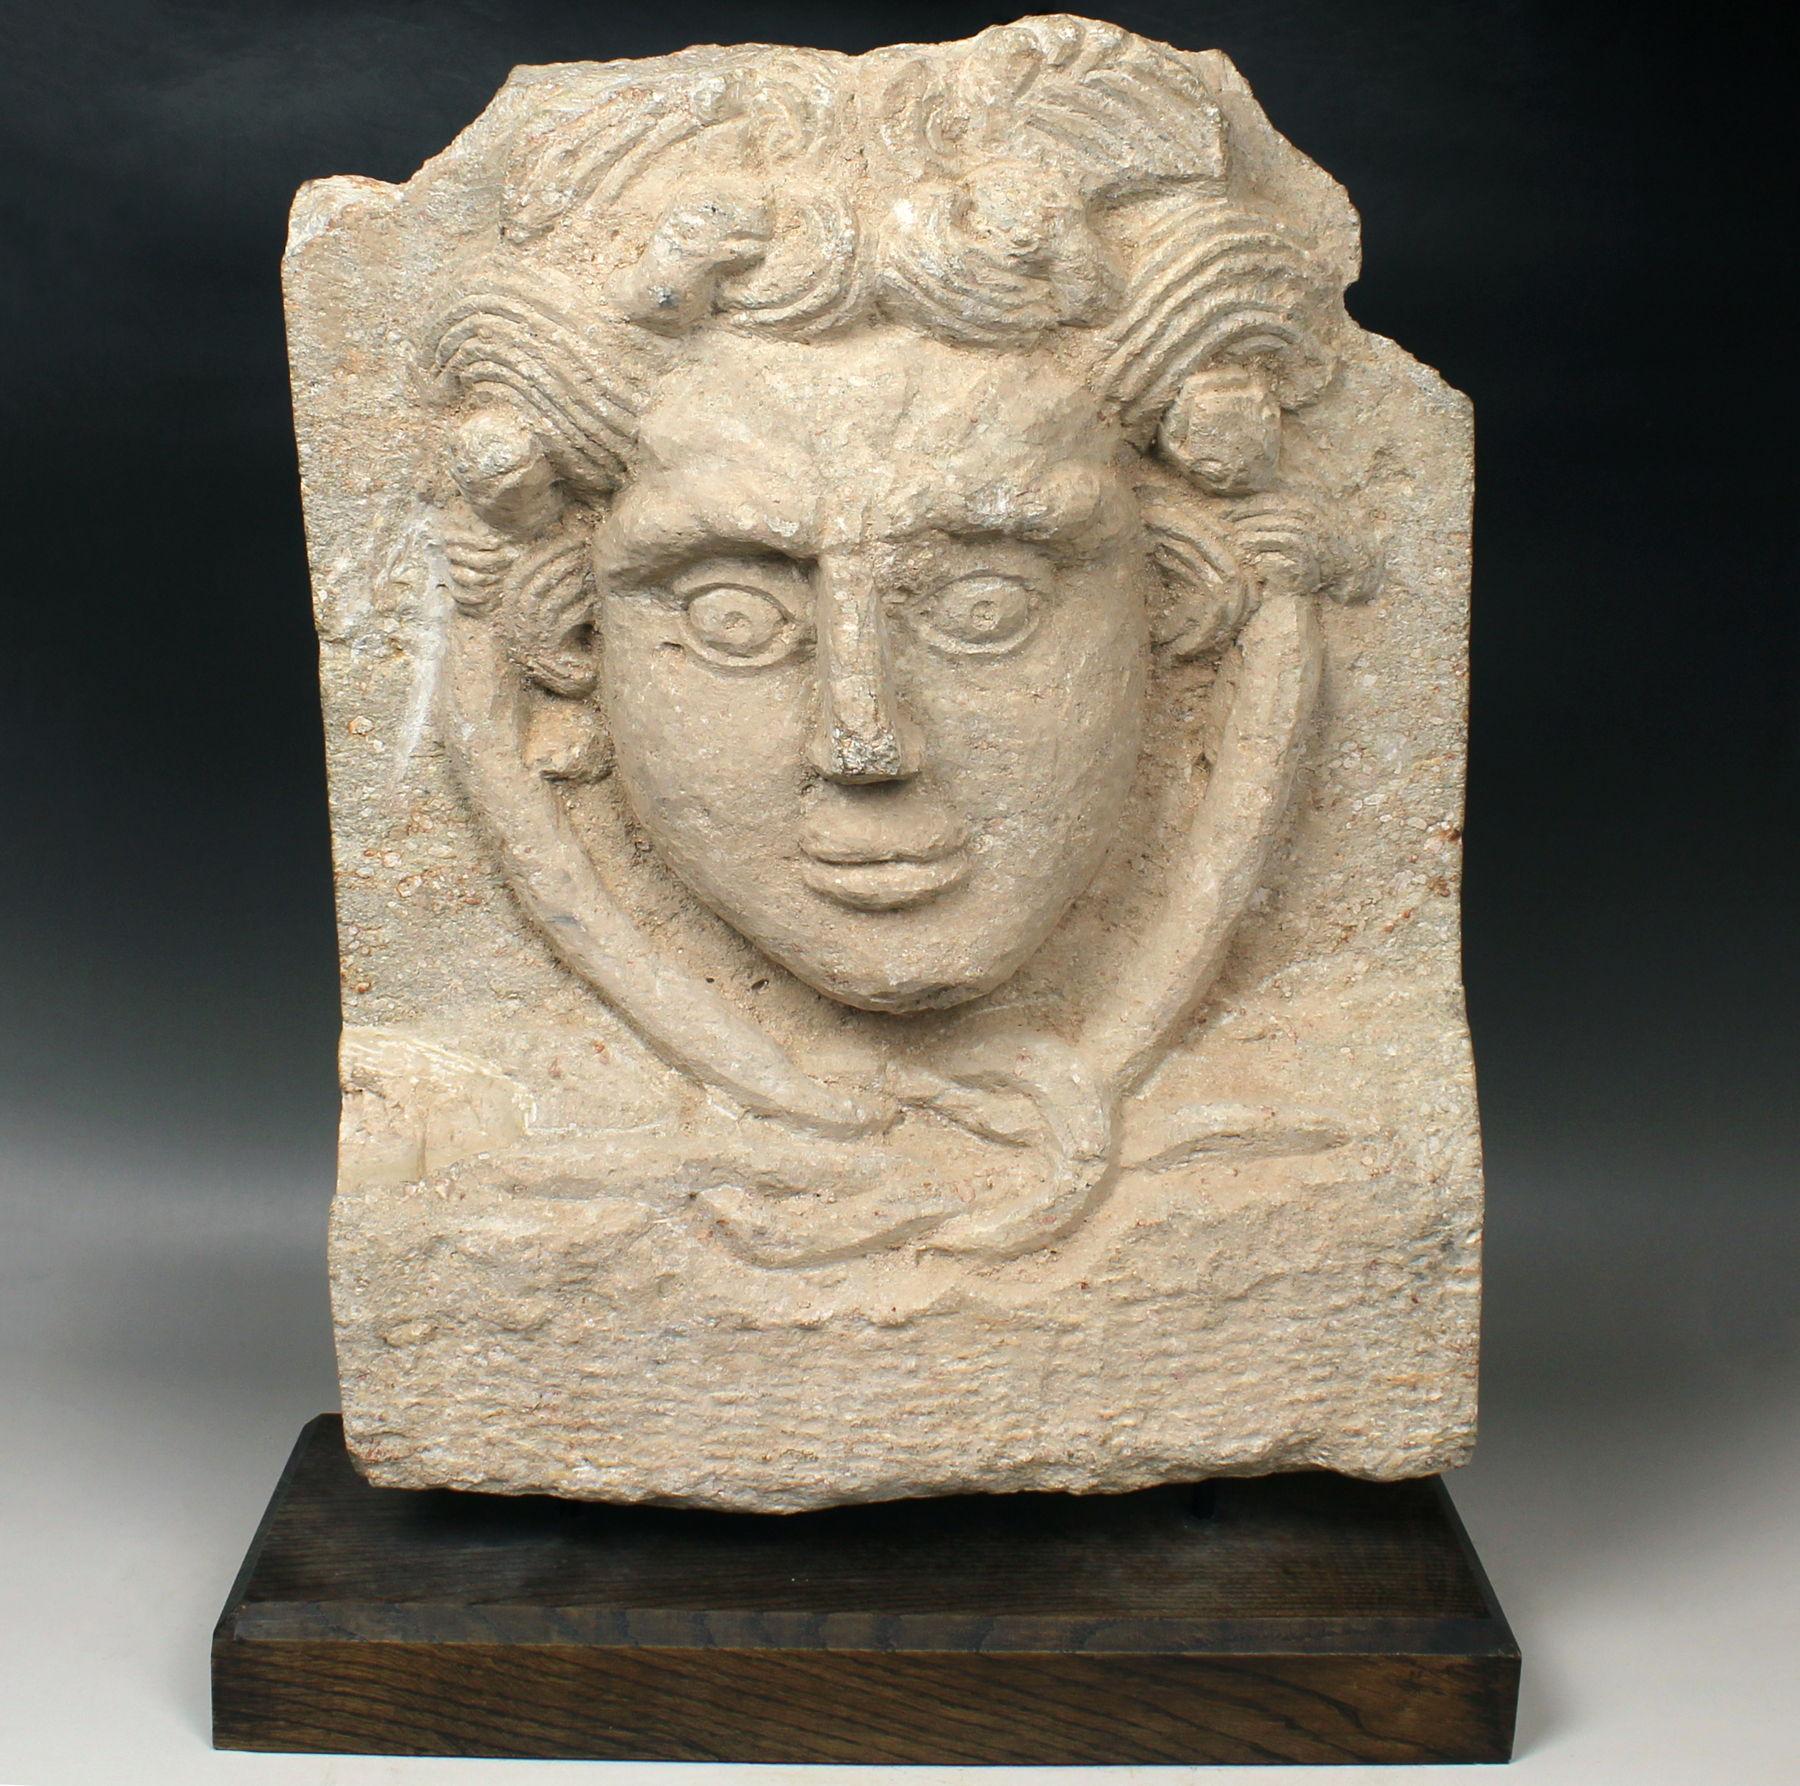 ITEM: Relief of Medusa and Hercules knot
MATERIAL: Limestone
CULTURE: Roman
PERIOD: 2nd – 3rd Century A.D
DIMENSIONS: 465 mm x 362 mm x 103 mm (without stand)
CONDITION: Good condition. Includes stand
PROVENANCE: Ex English private collection, P.A.,